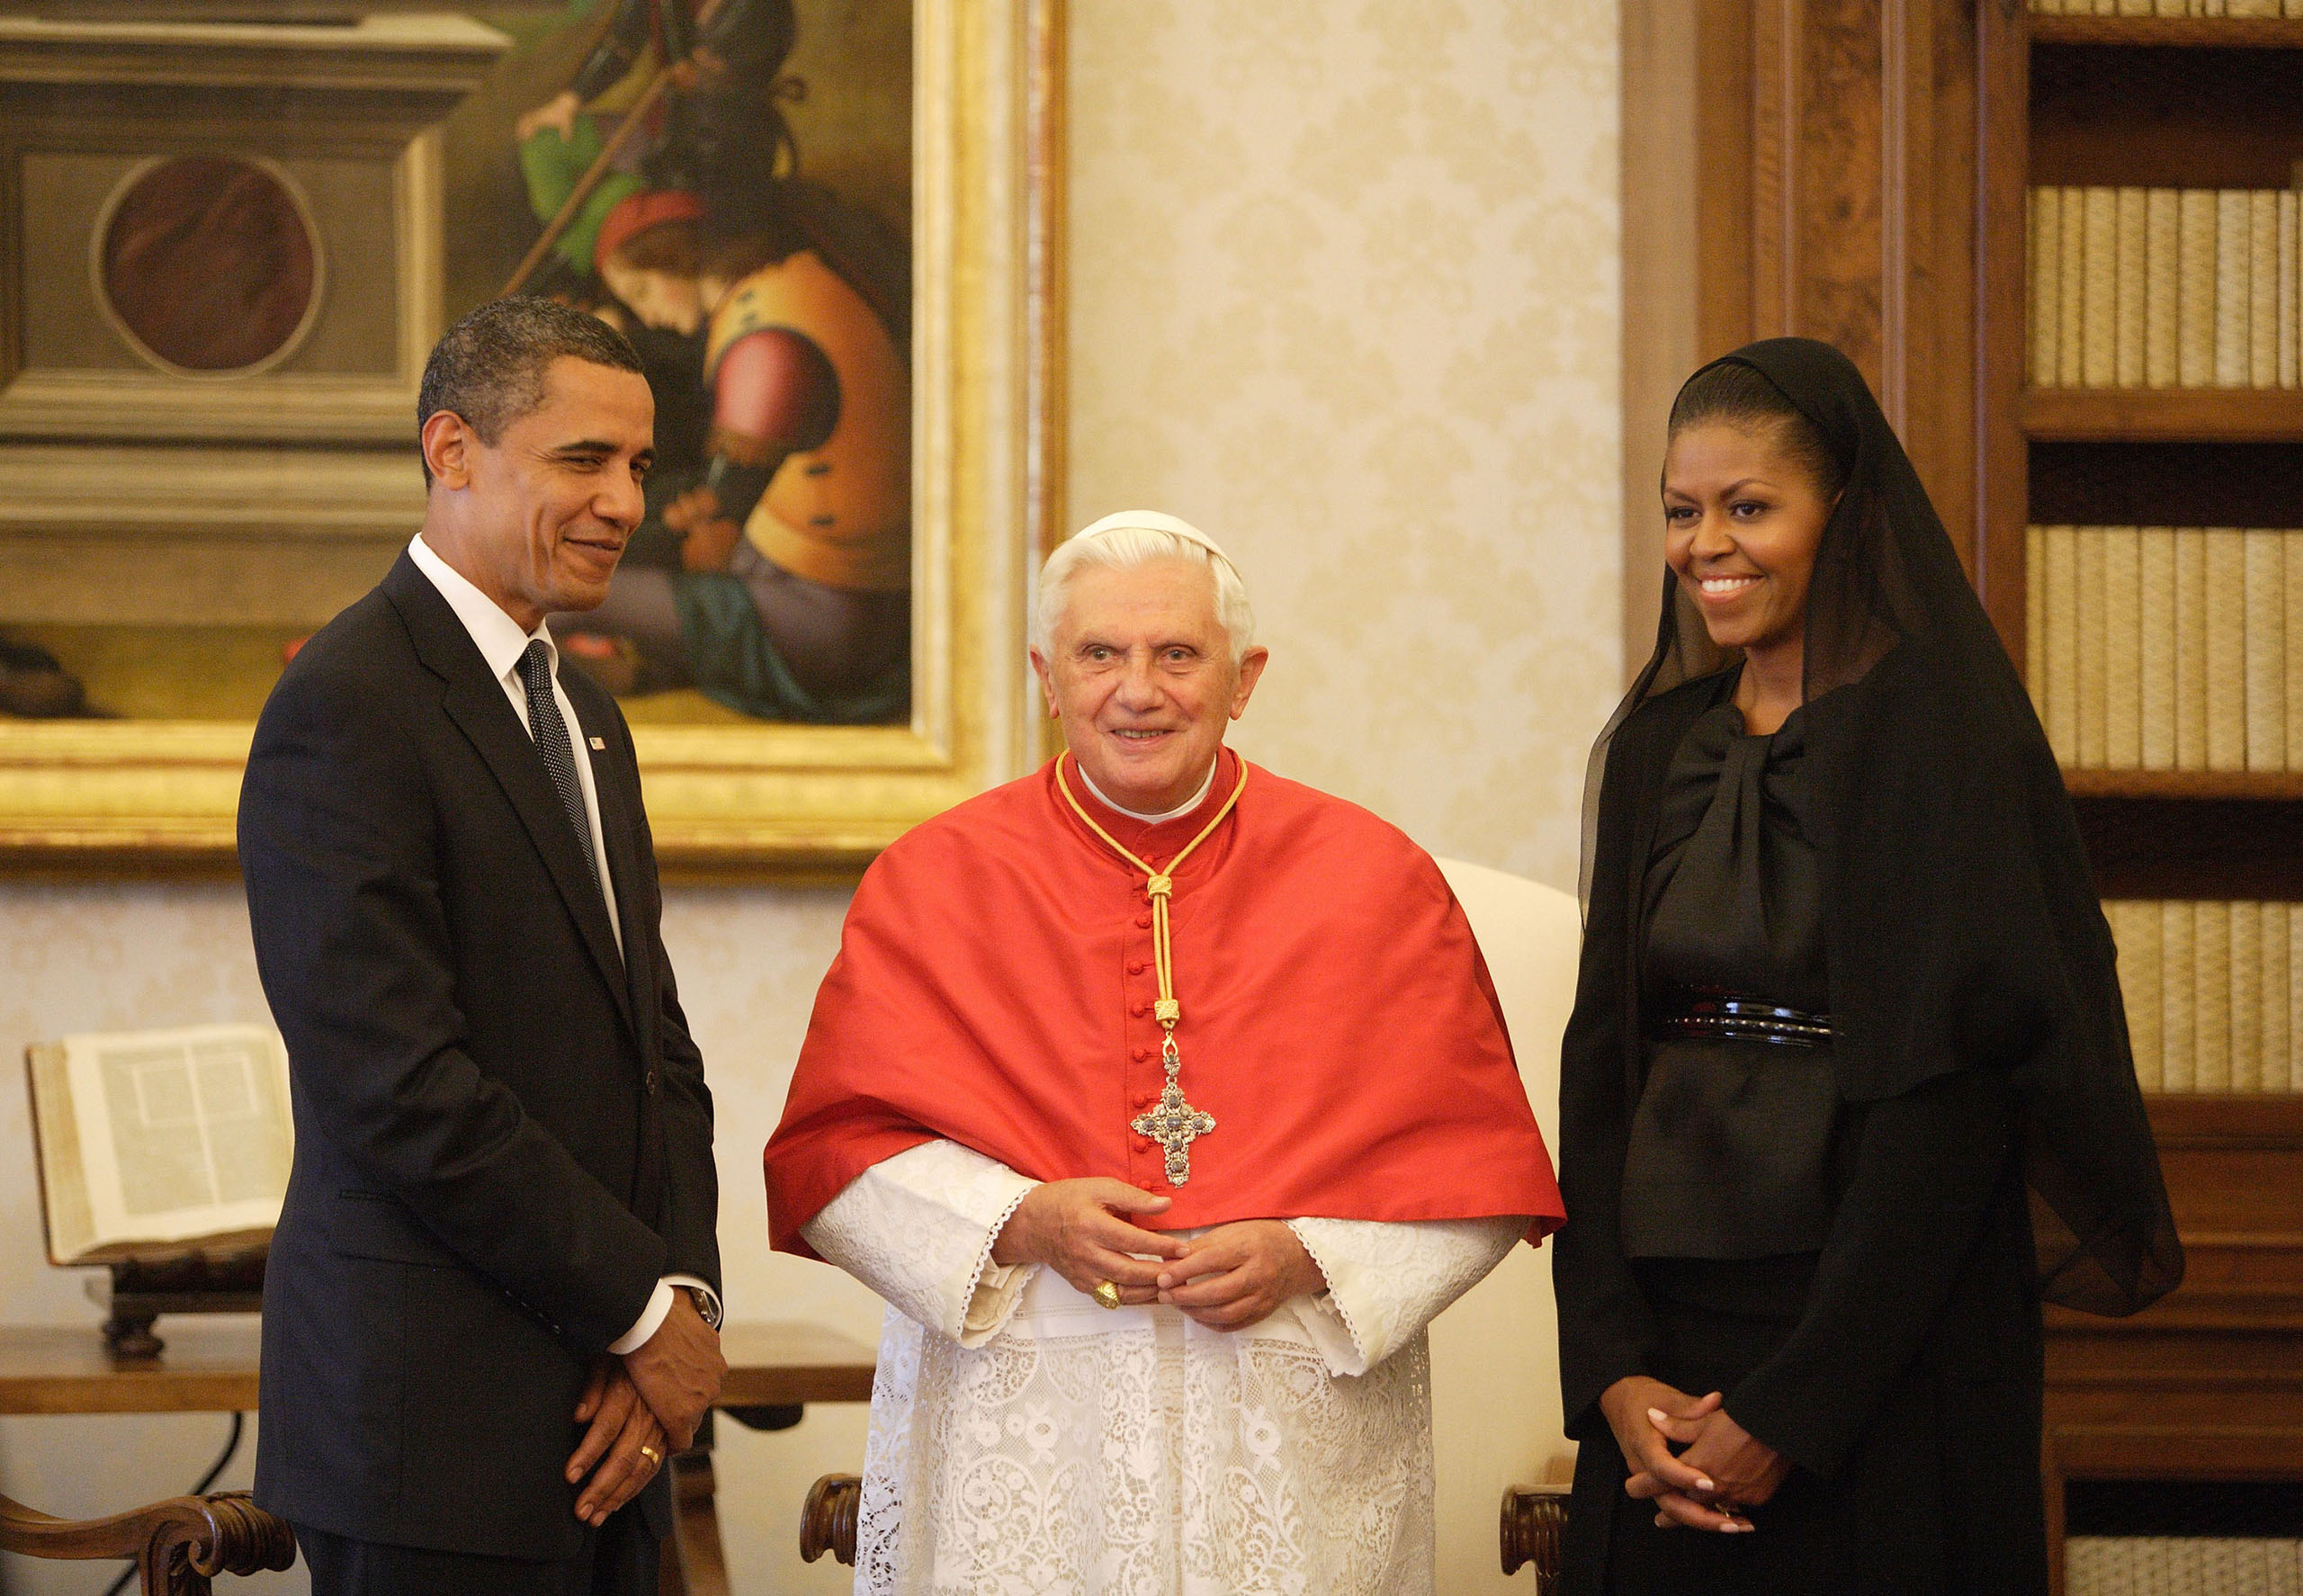 US President Barack Obama (L) and First Lady Michelle Obama meet with Pope Benedict XVI in his library at the Vatican on July 10, 2009. (Vatican Pool/Getty Images)